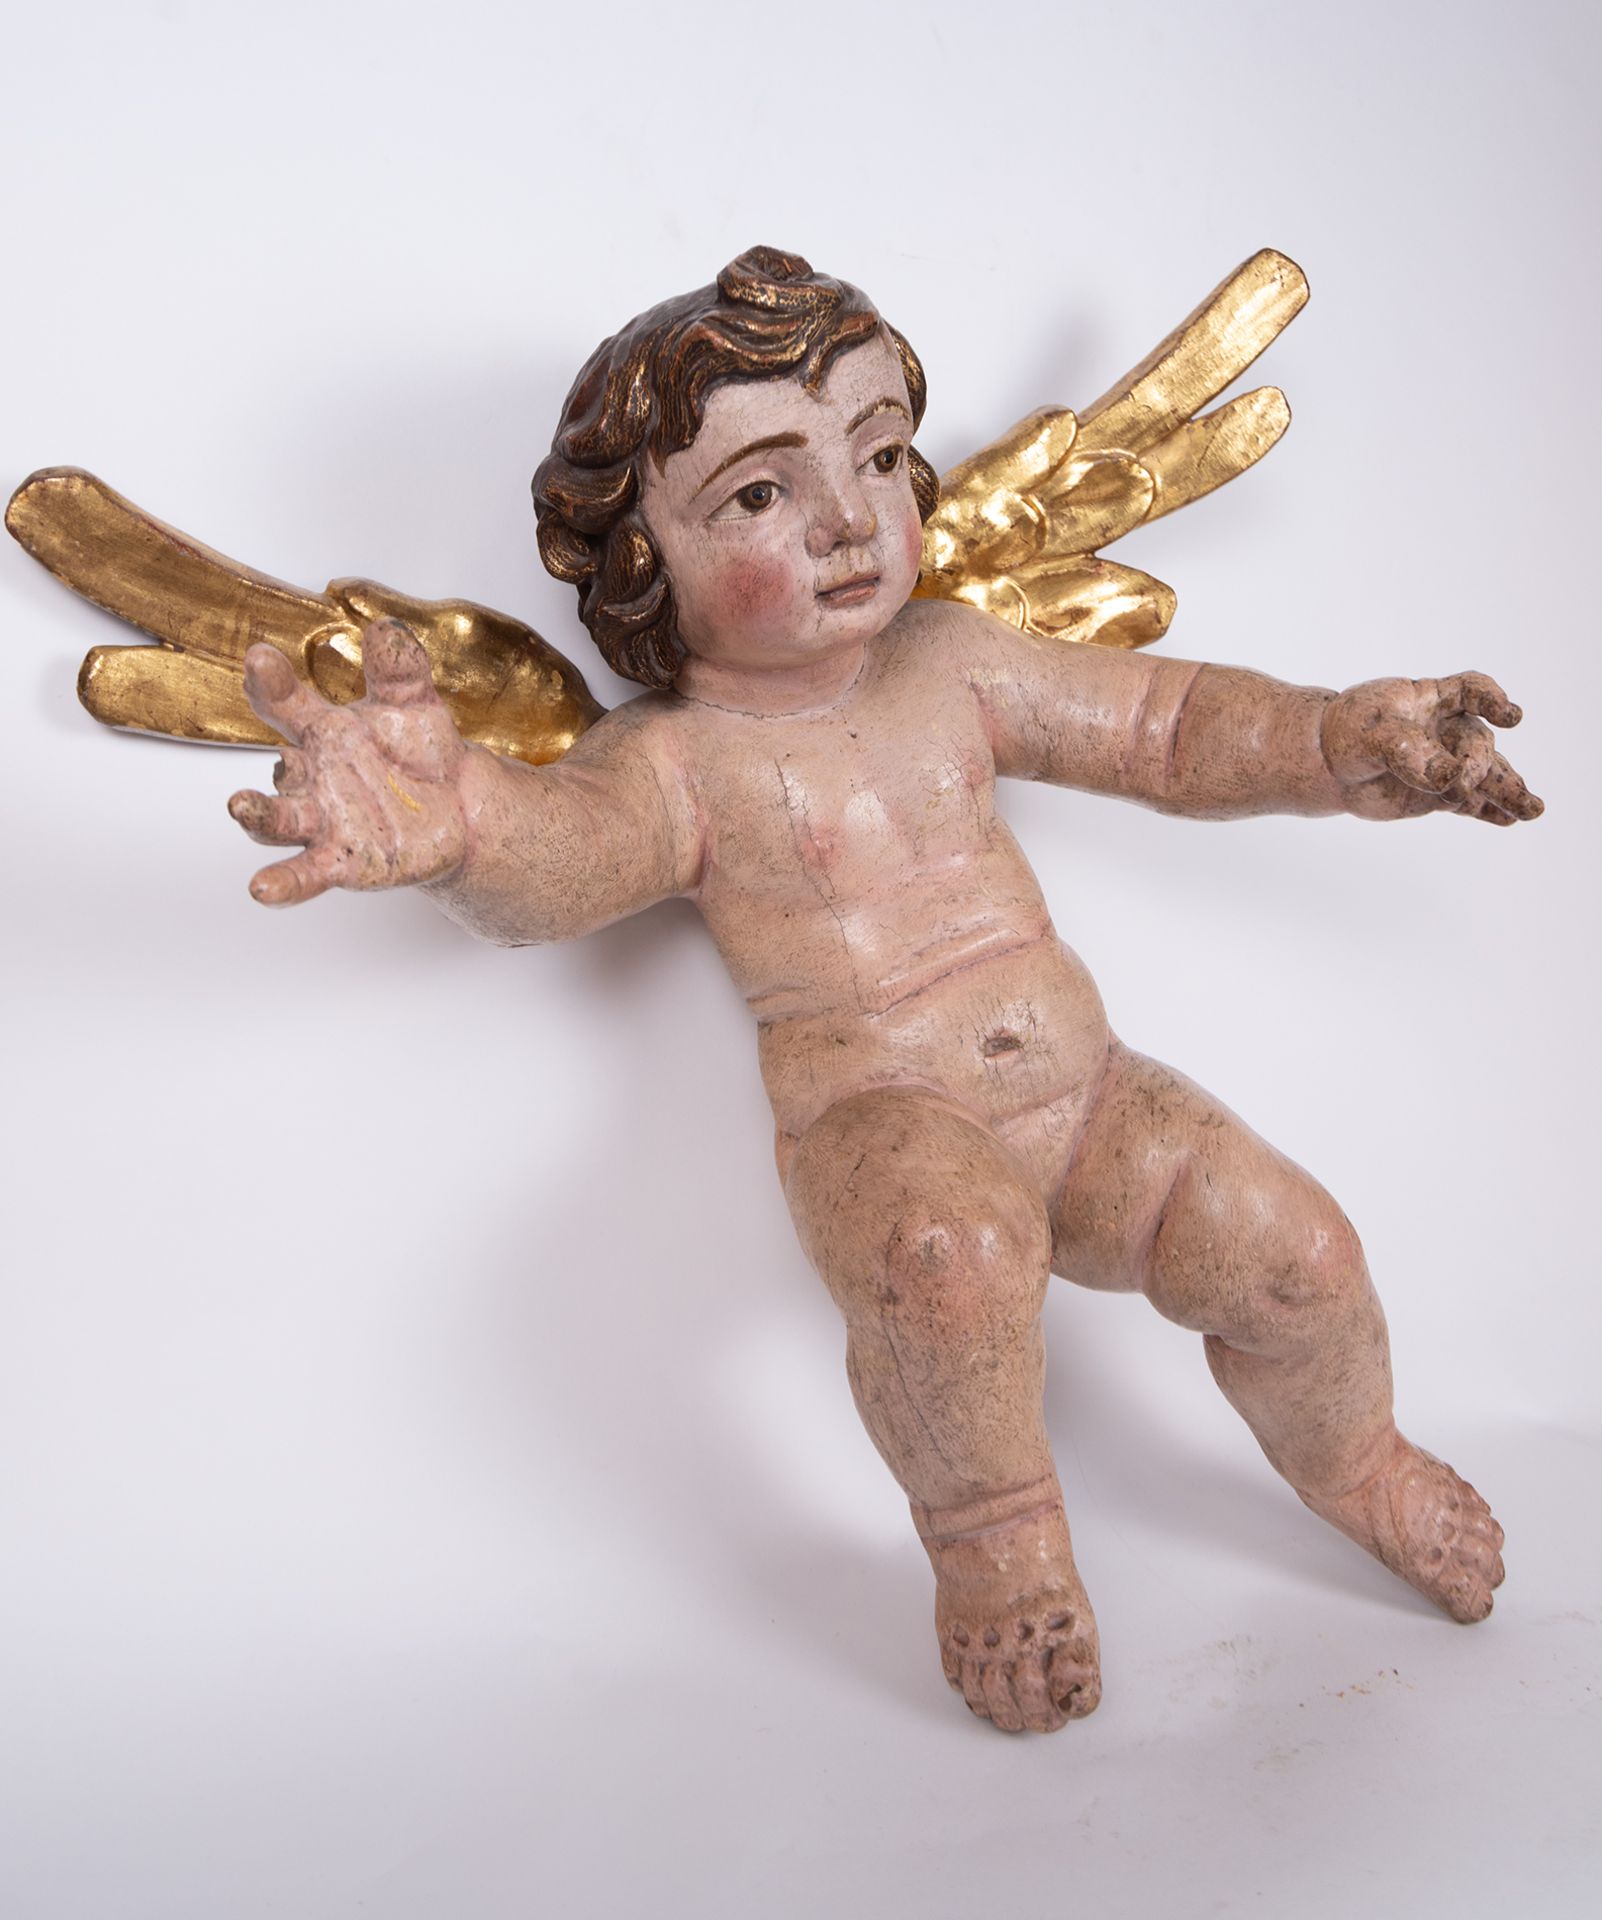 Pair of Wall Applique Angels, Portuguese school from the 17th - 18th centuries - Image 9 of 11